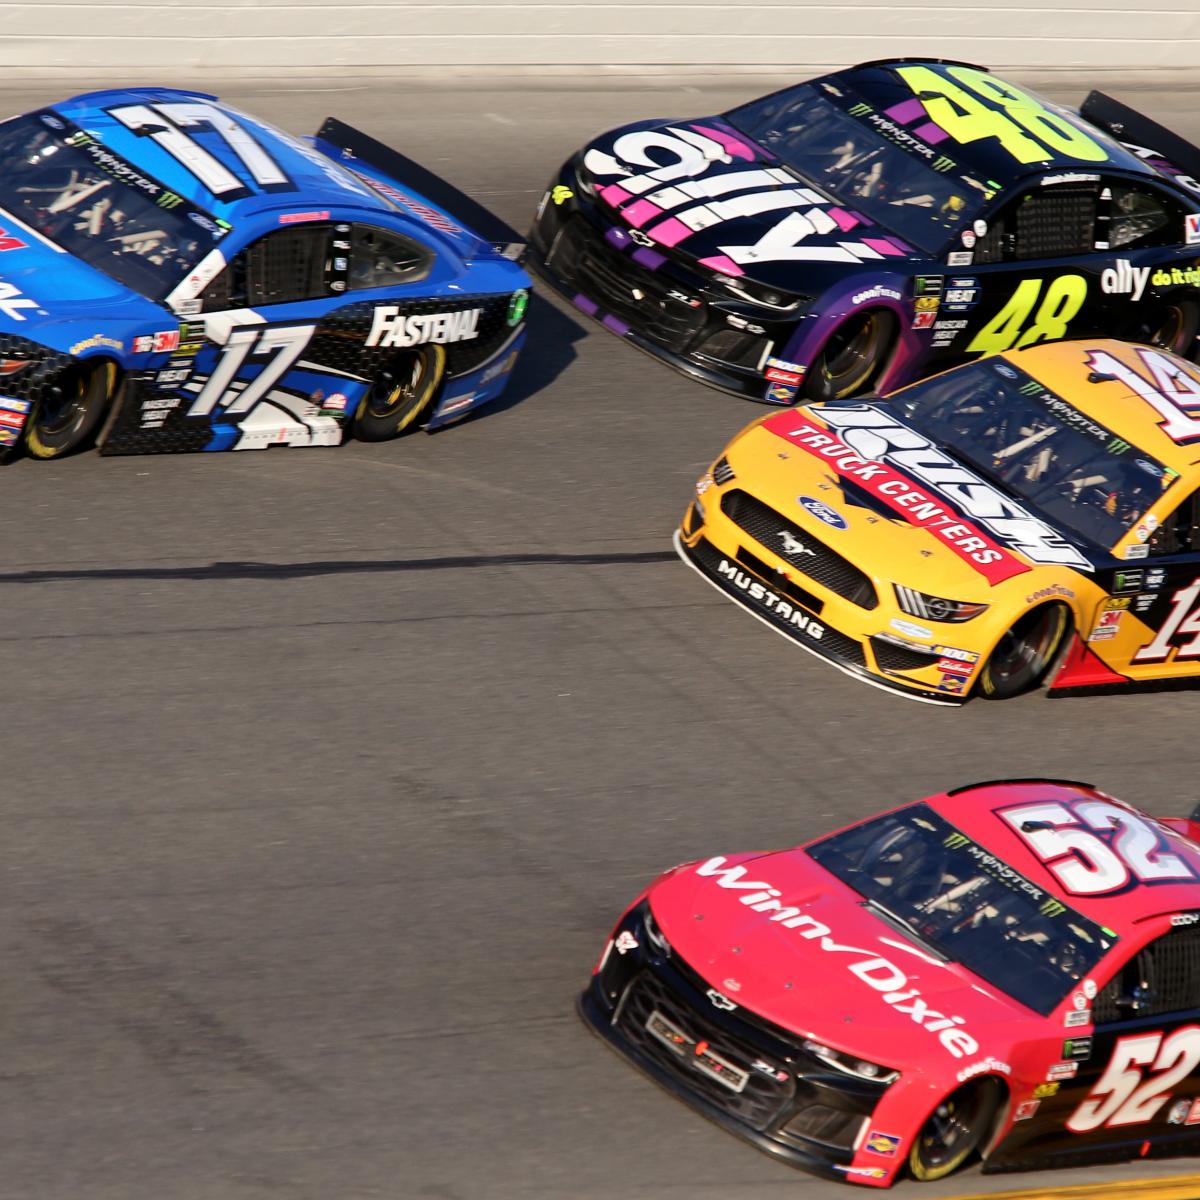 Daytona 500 2020 Qualifying Format, Group Rules, Schedule and More | Bleacher Report ...